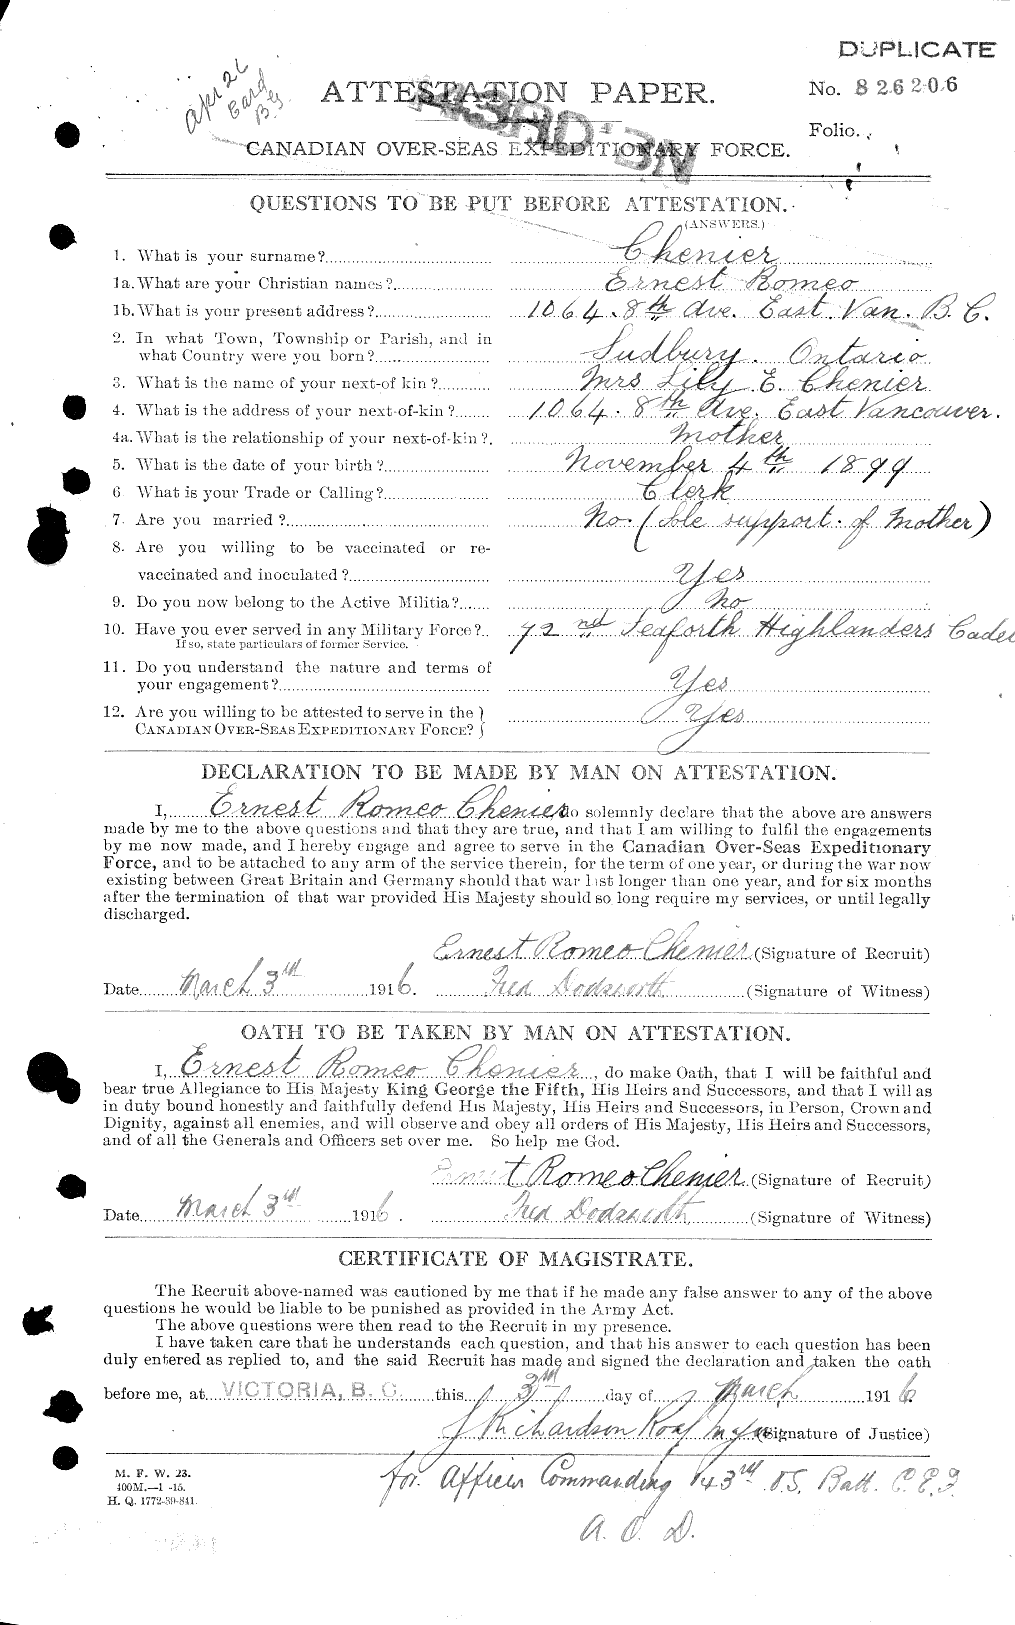 Personnel Records of the First World War - CEF 017404a